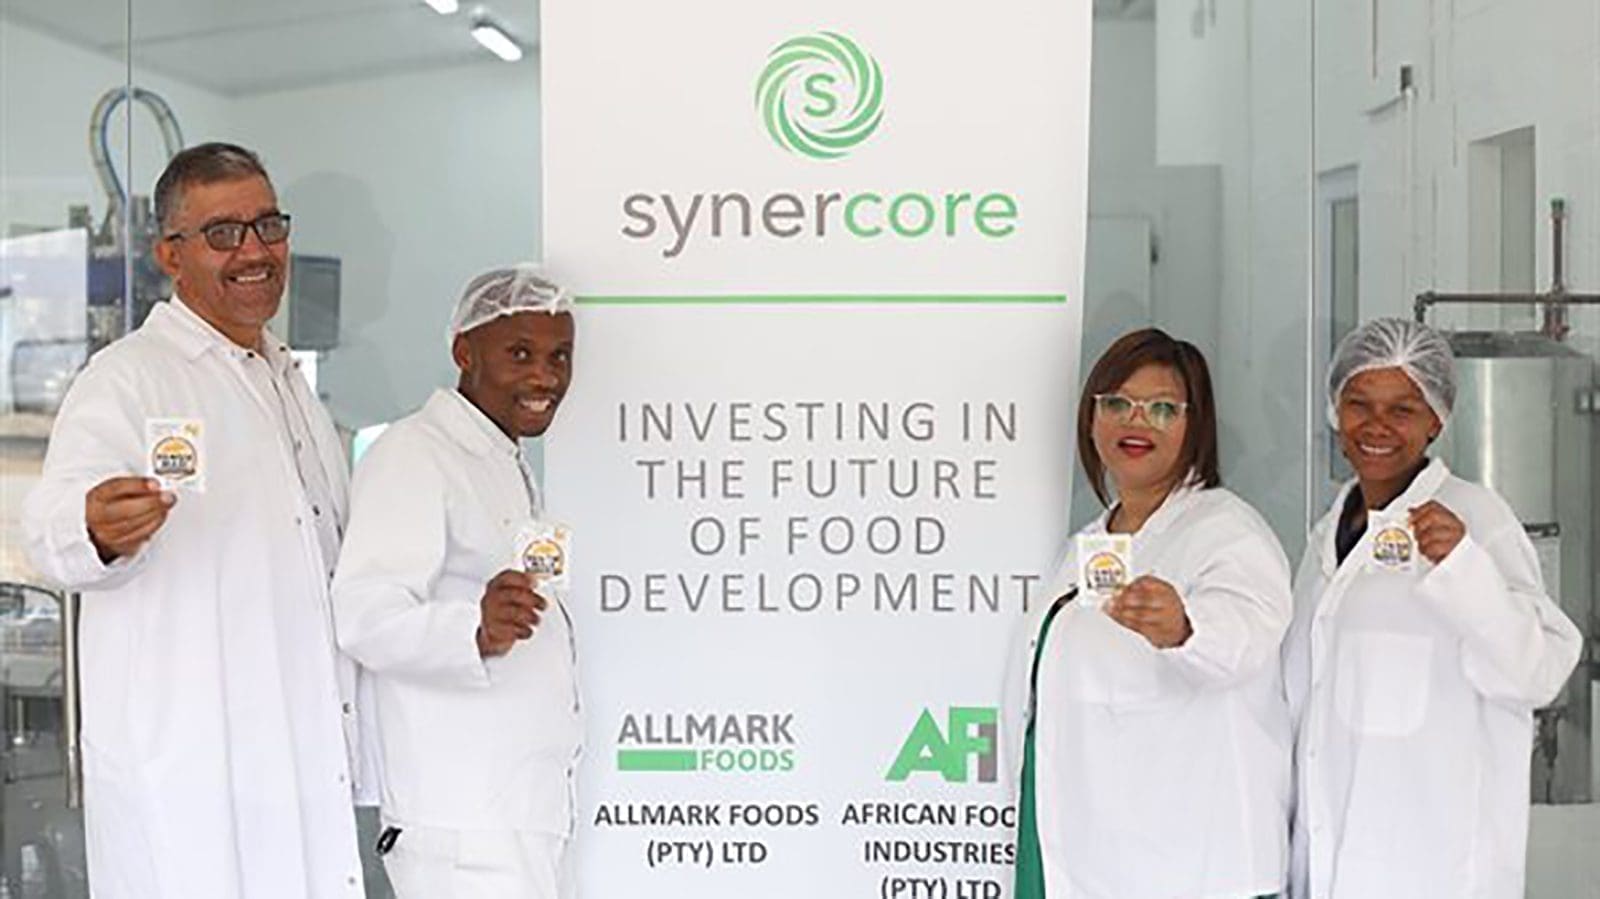 Tetra Pak partners with SA food company Synercore to boost innovation along food value chain in Africa